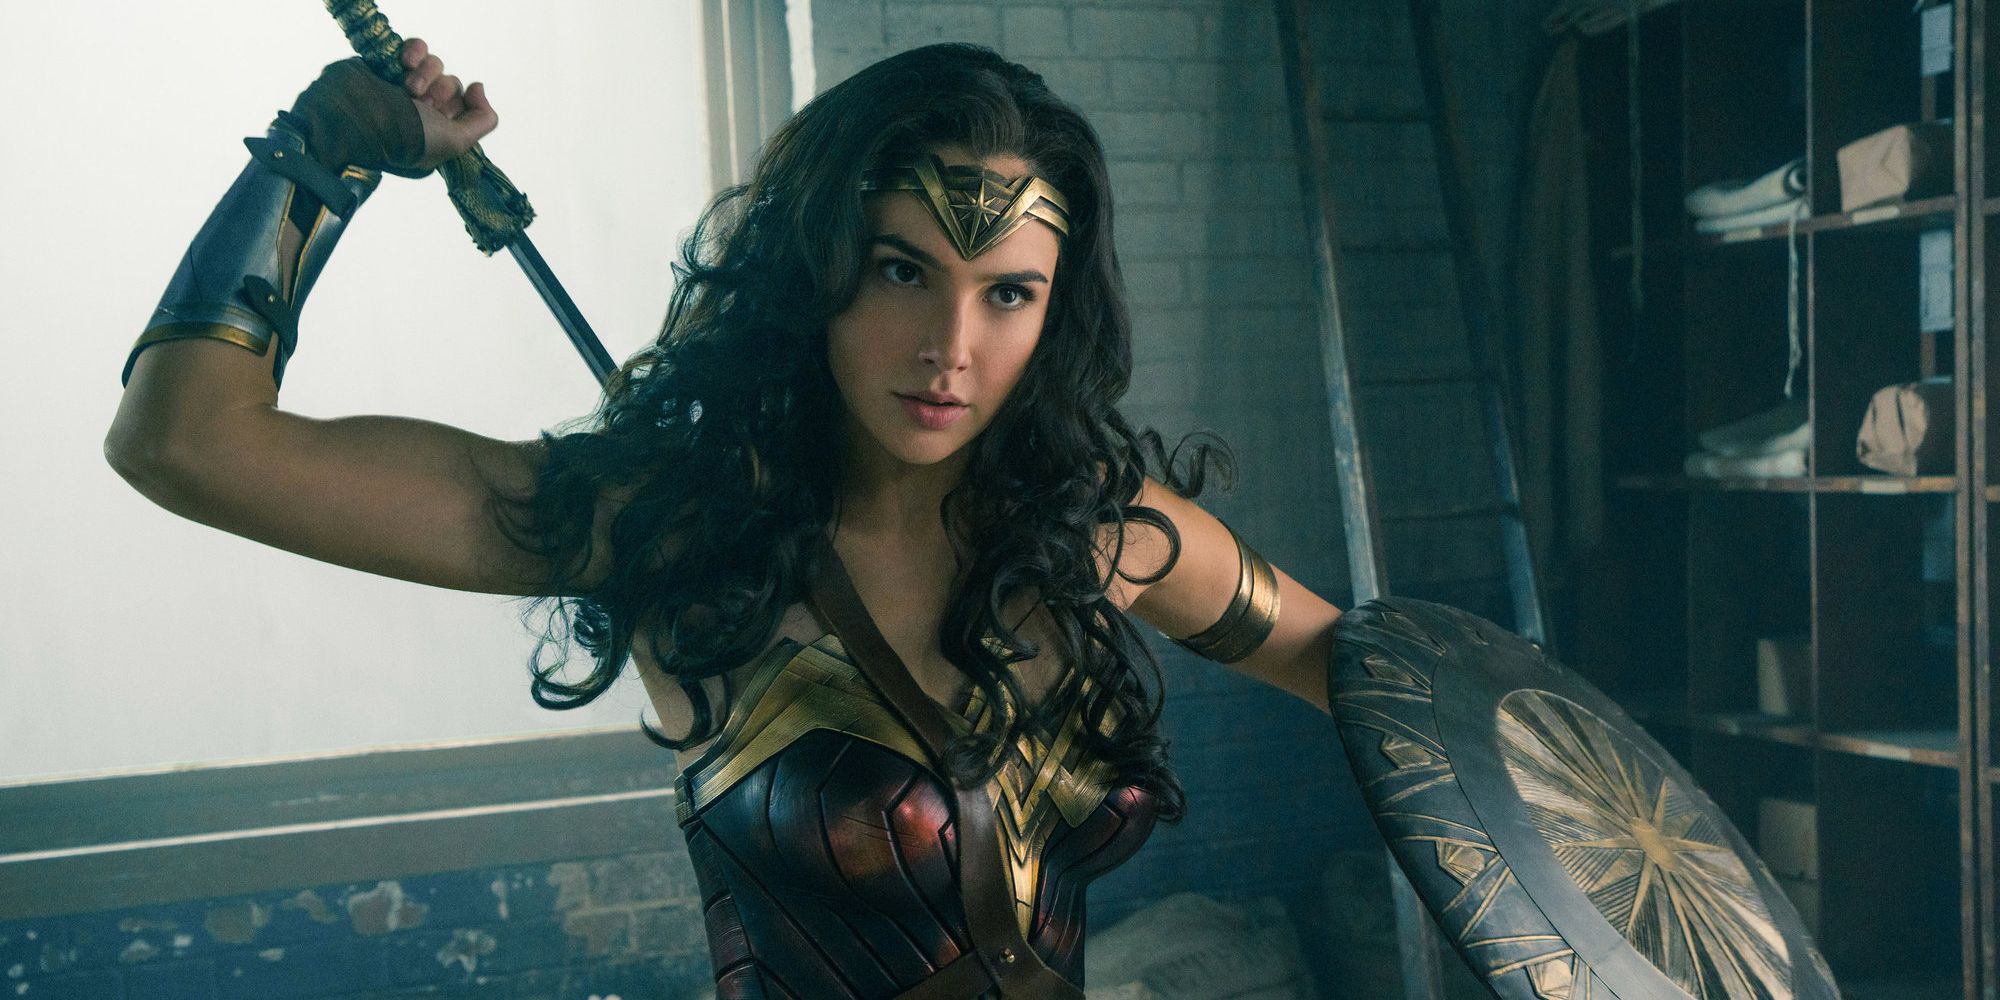 Gal Gadot gets ready to fight in Wonder Woman